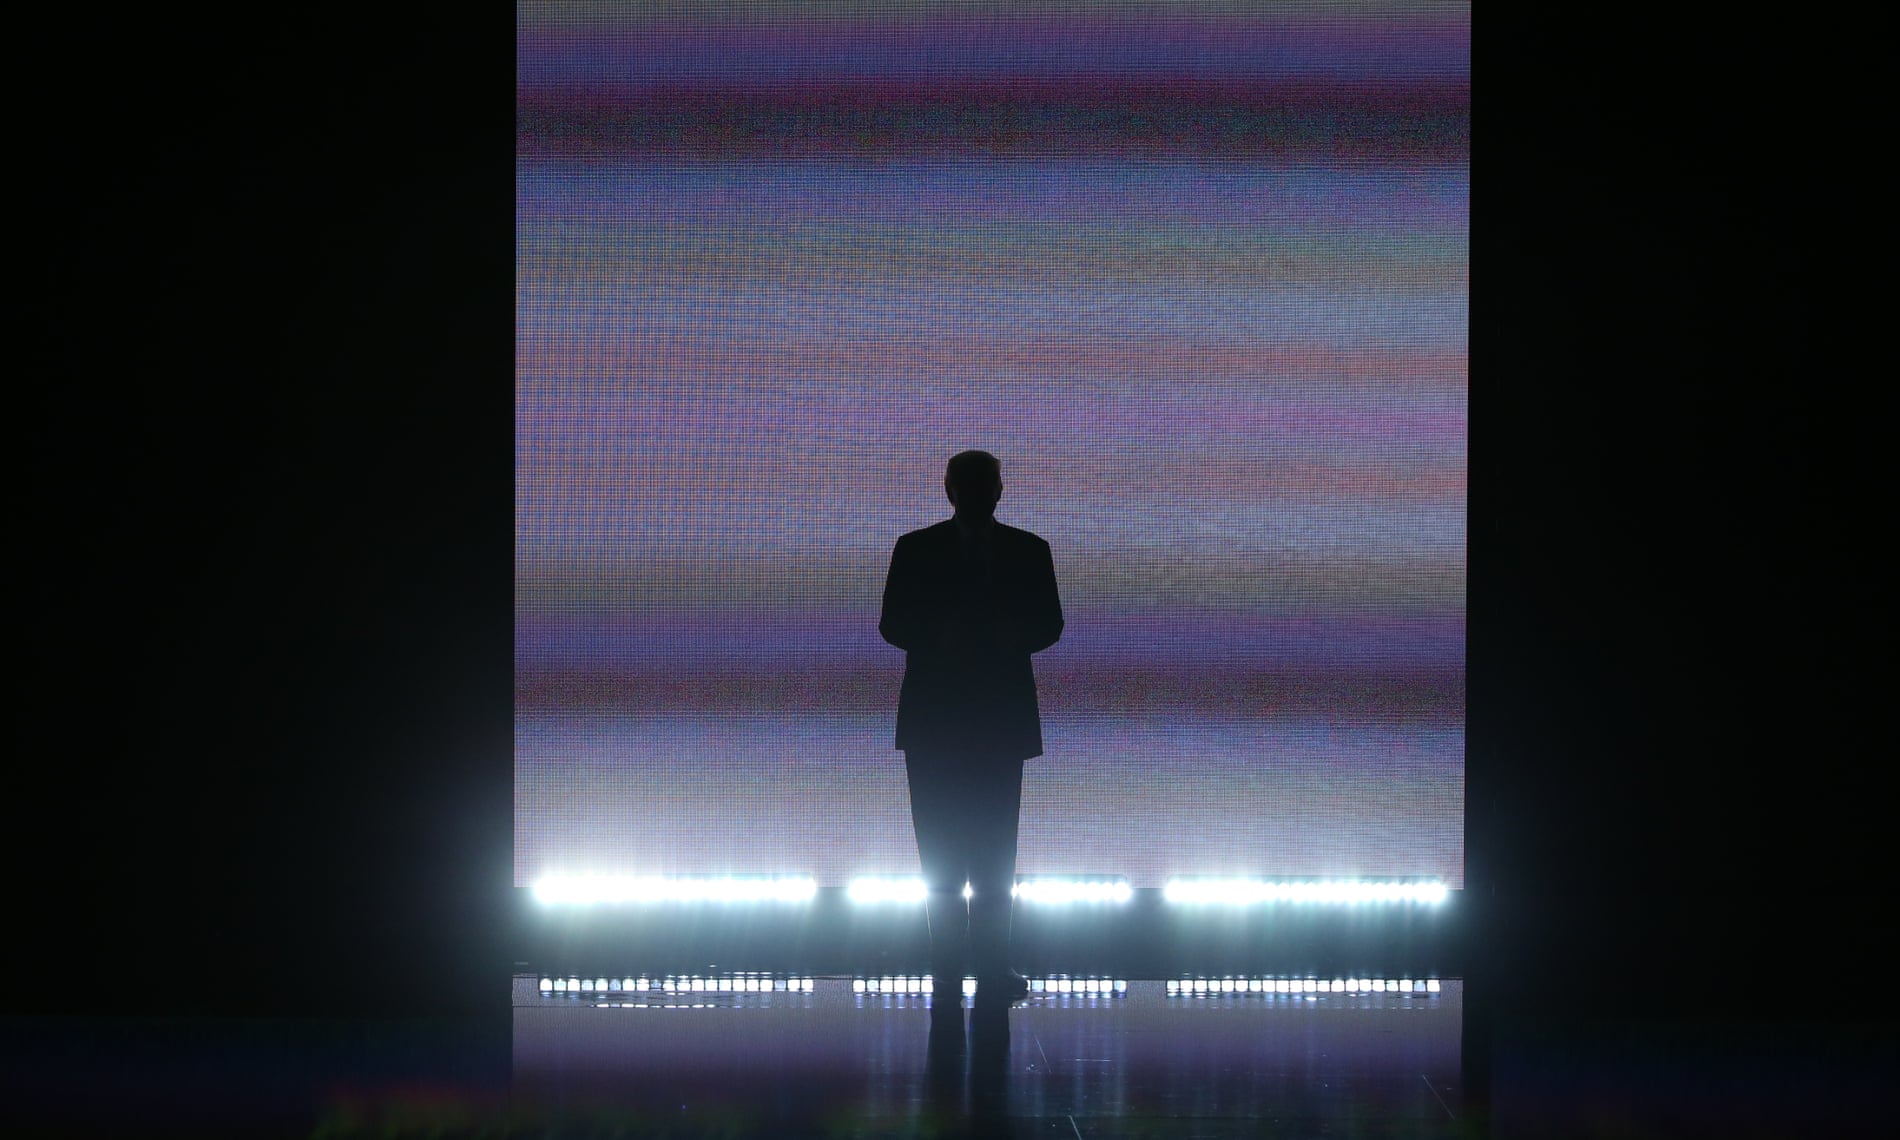 Donald Trump is seen on stage during the Republican National Convention in Cleveland in 2016.